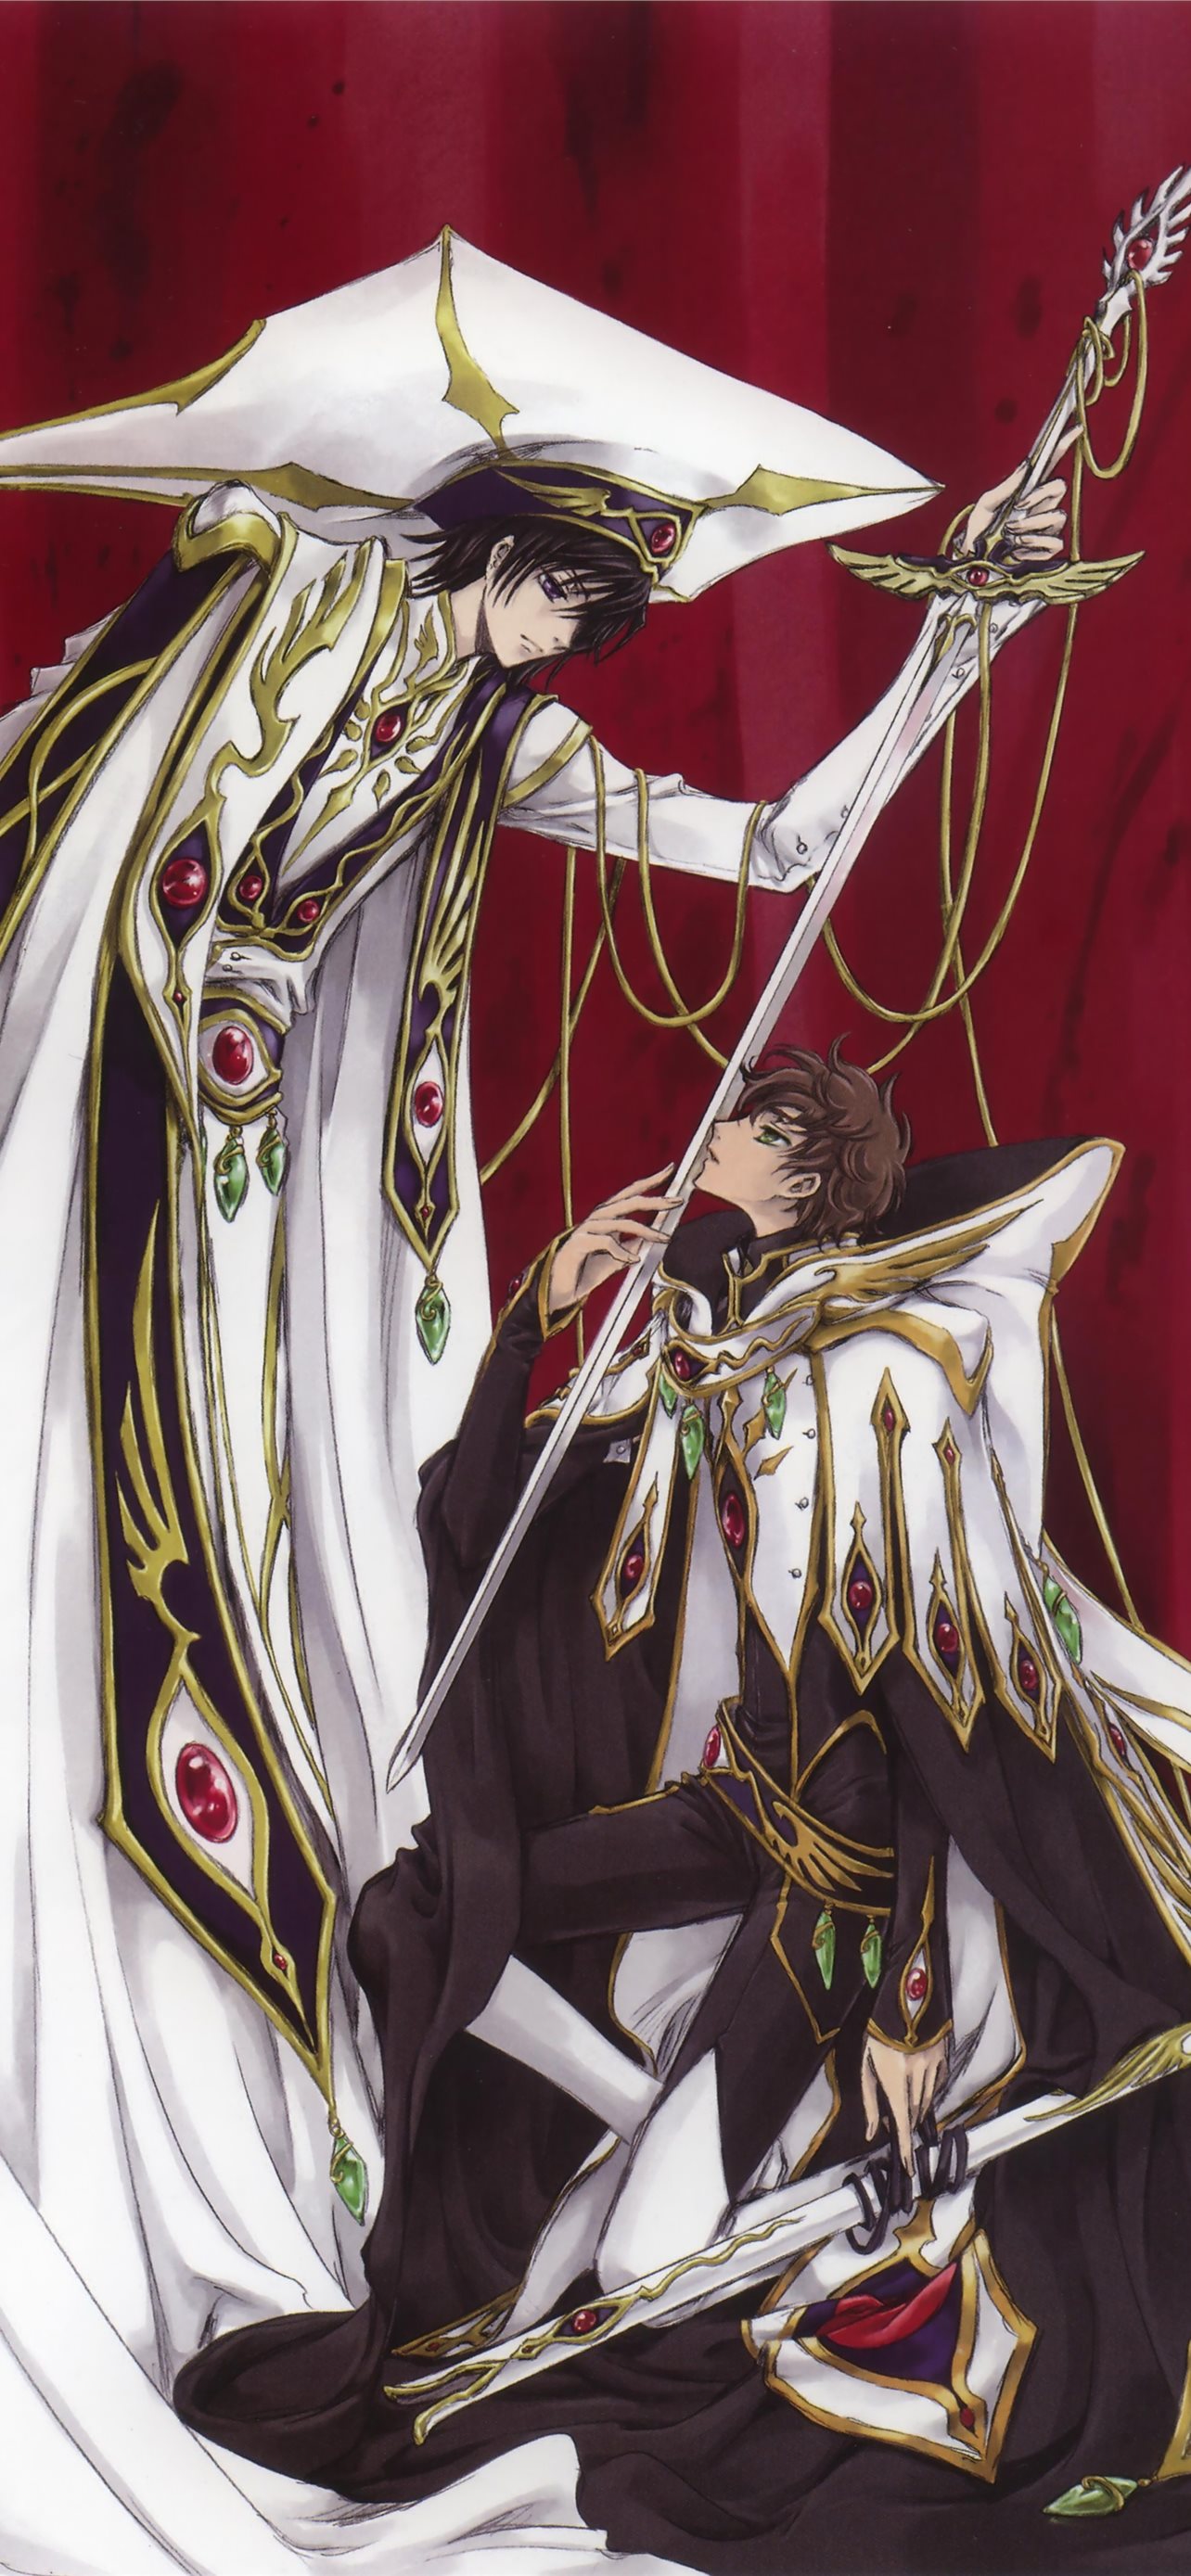 19 Lelouch Wallpapers for iPhone and Android by William French